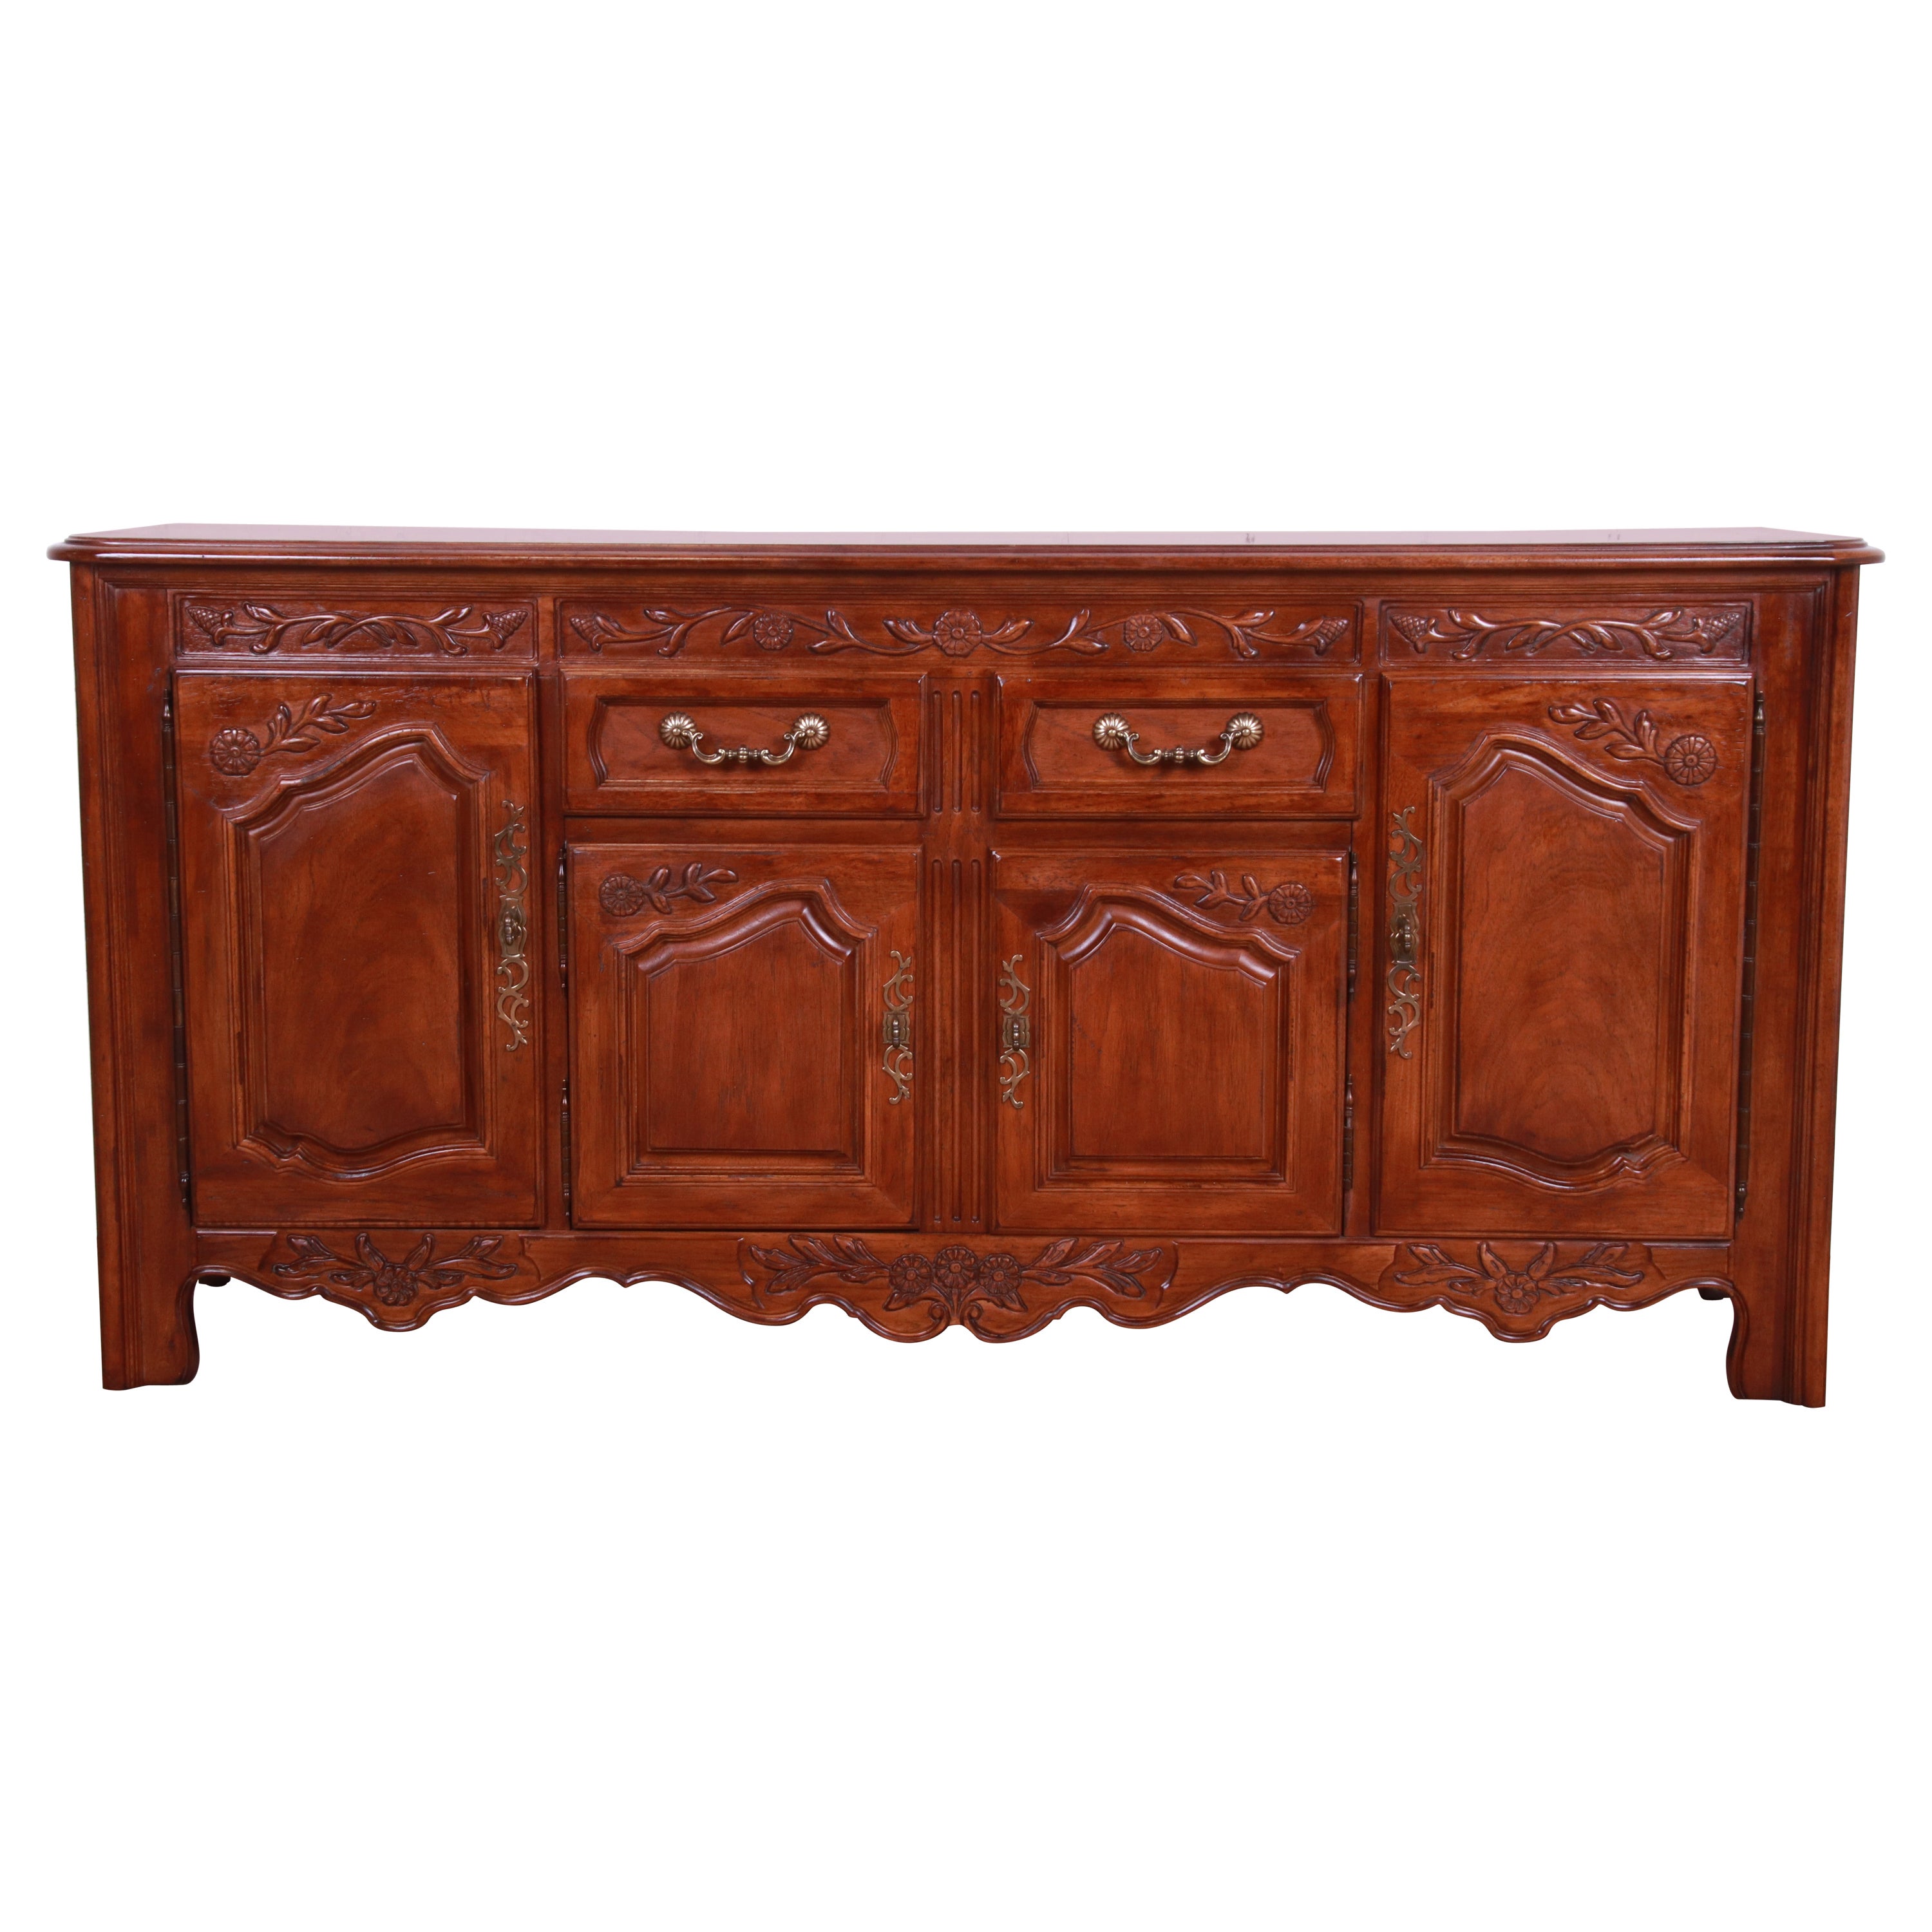 Thomasville French Provincial Louis XV Carved Walnut Sideboard Credenza